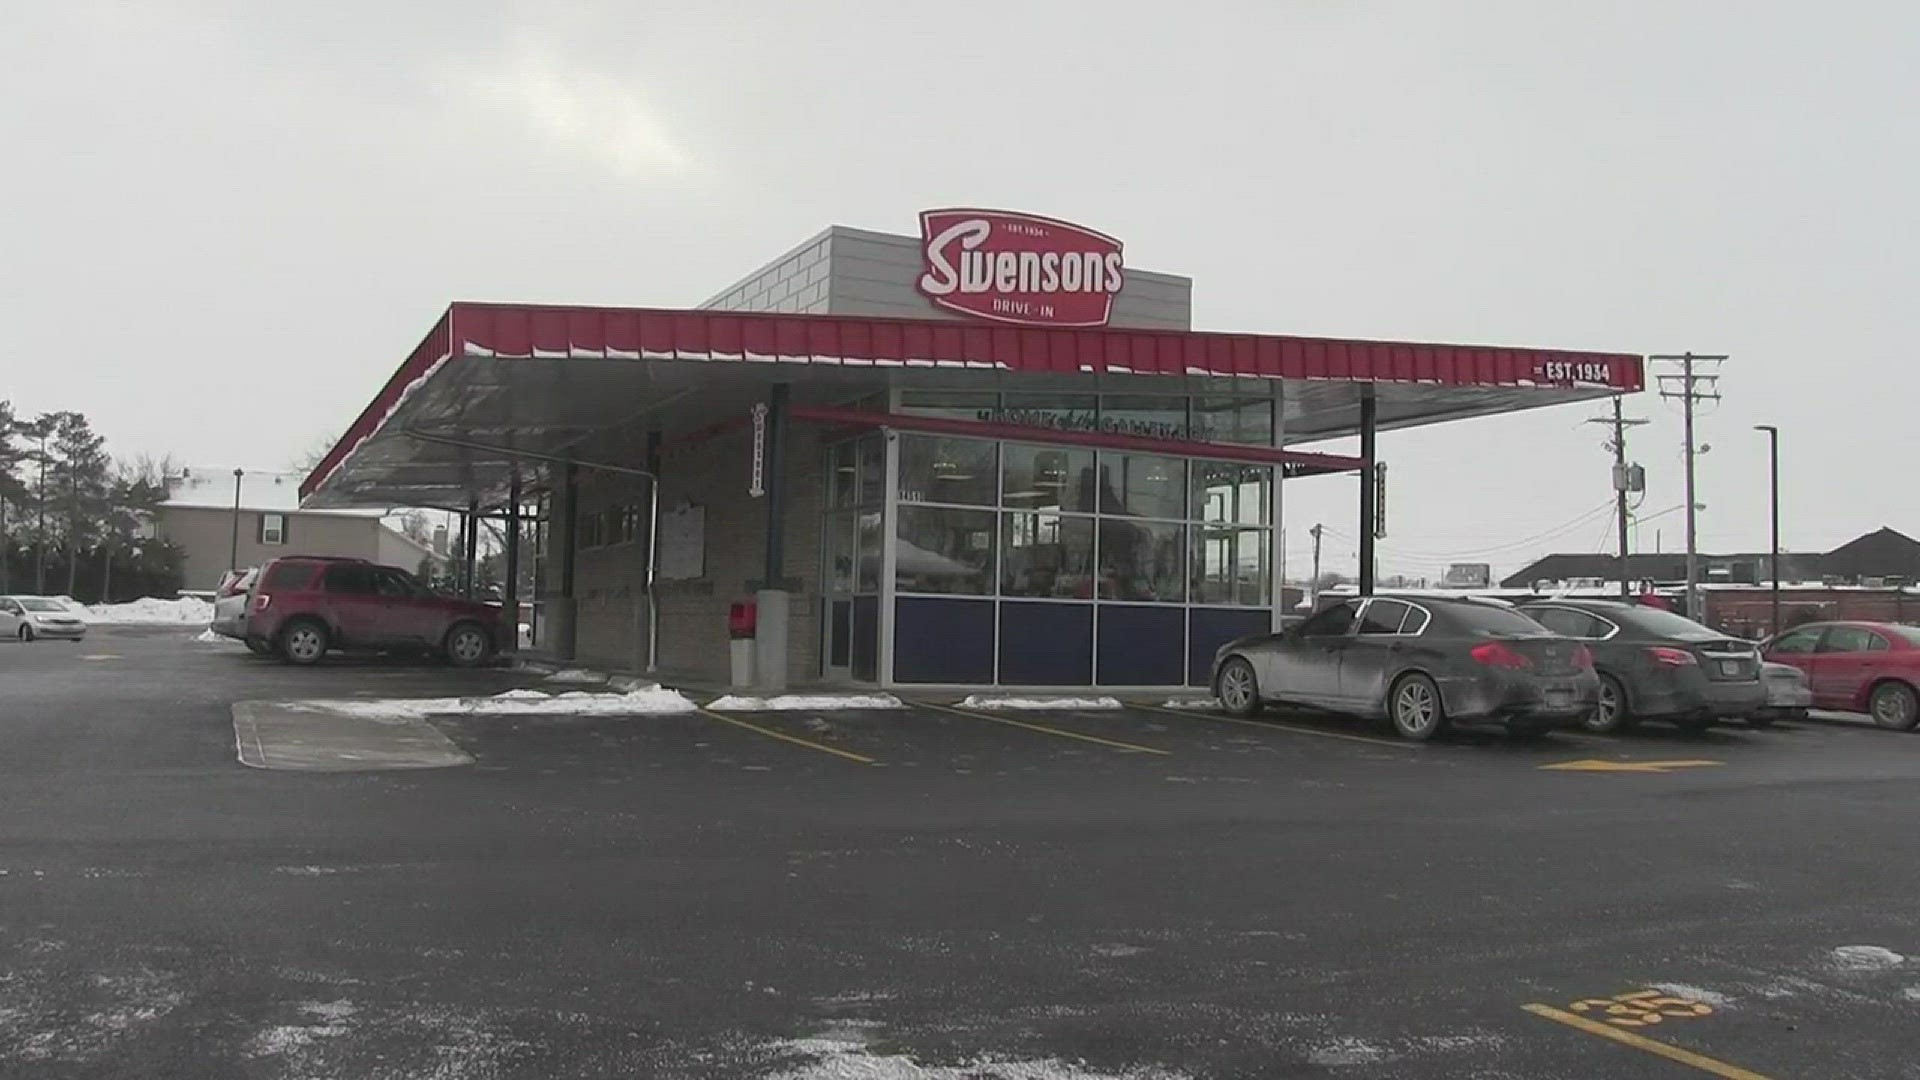 Jan. 5, 2018: Galley Boy goodness has hit University Heights. Yep, folks can now sink their teeth into the iconic Swensons burgers at a new location nestled near John Carroll University. WKYC was given an exclusive tour Friday as the company continued its